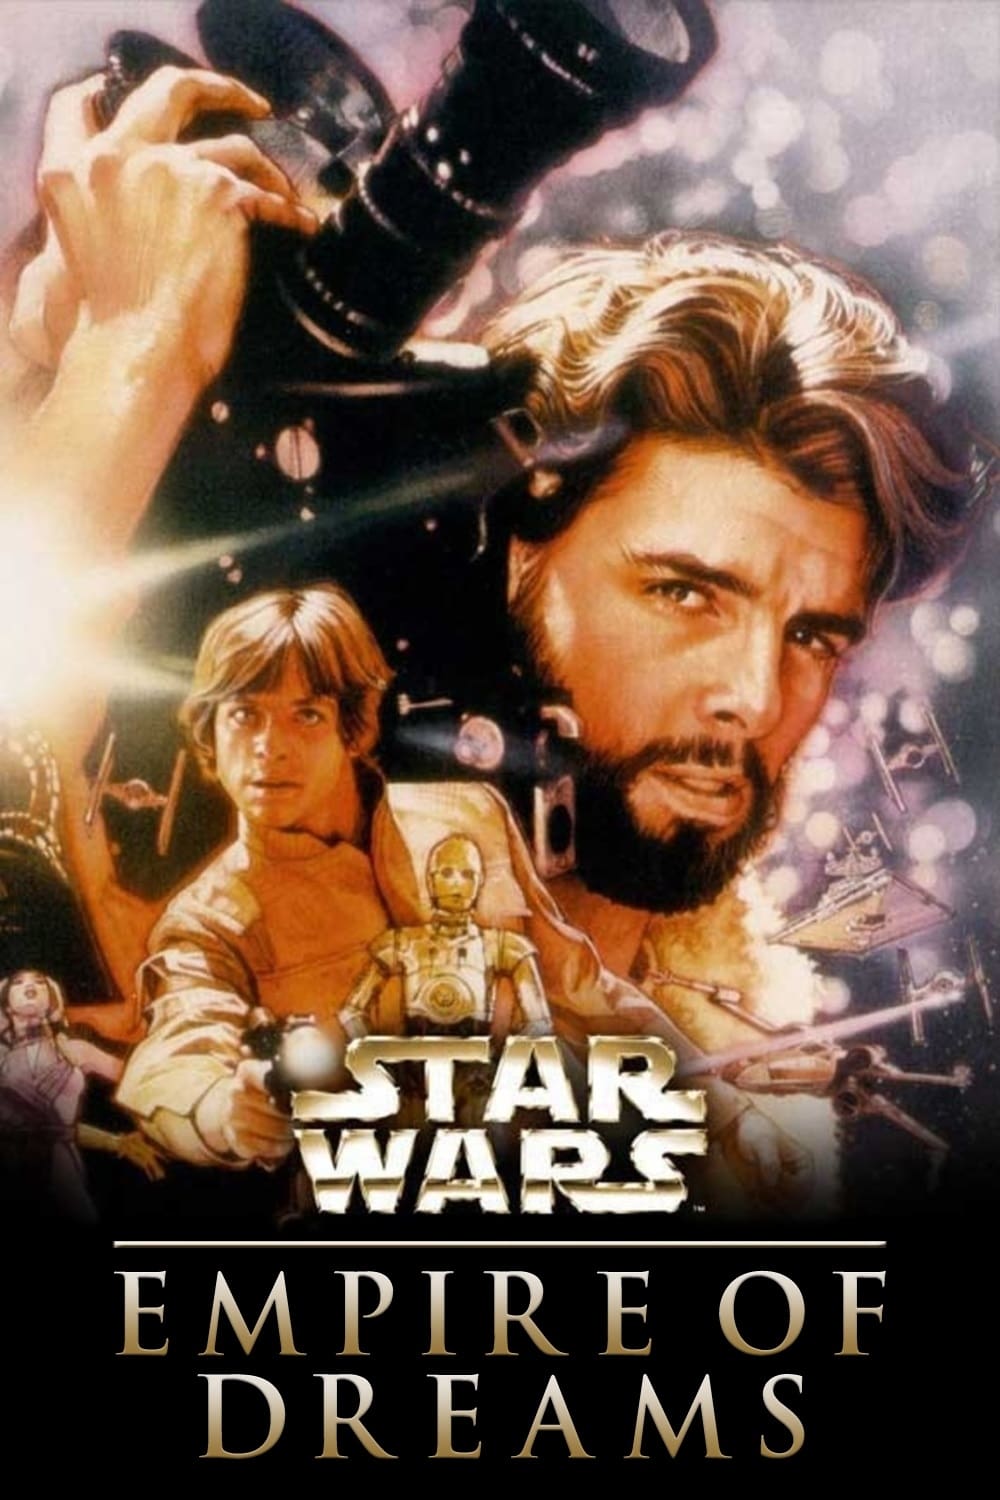 Empire of Dreams: The Story of the Star Wars Trilogy (2004)